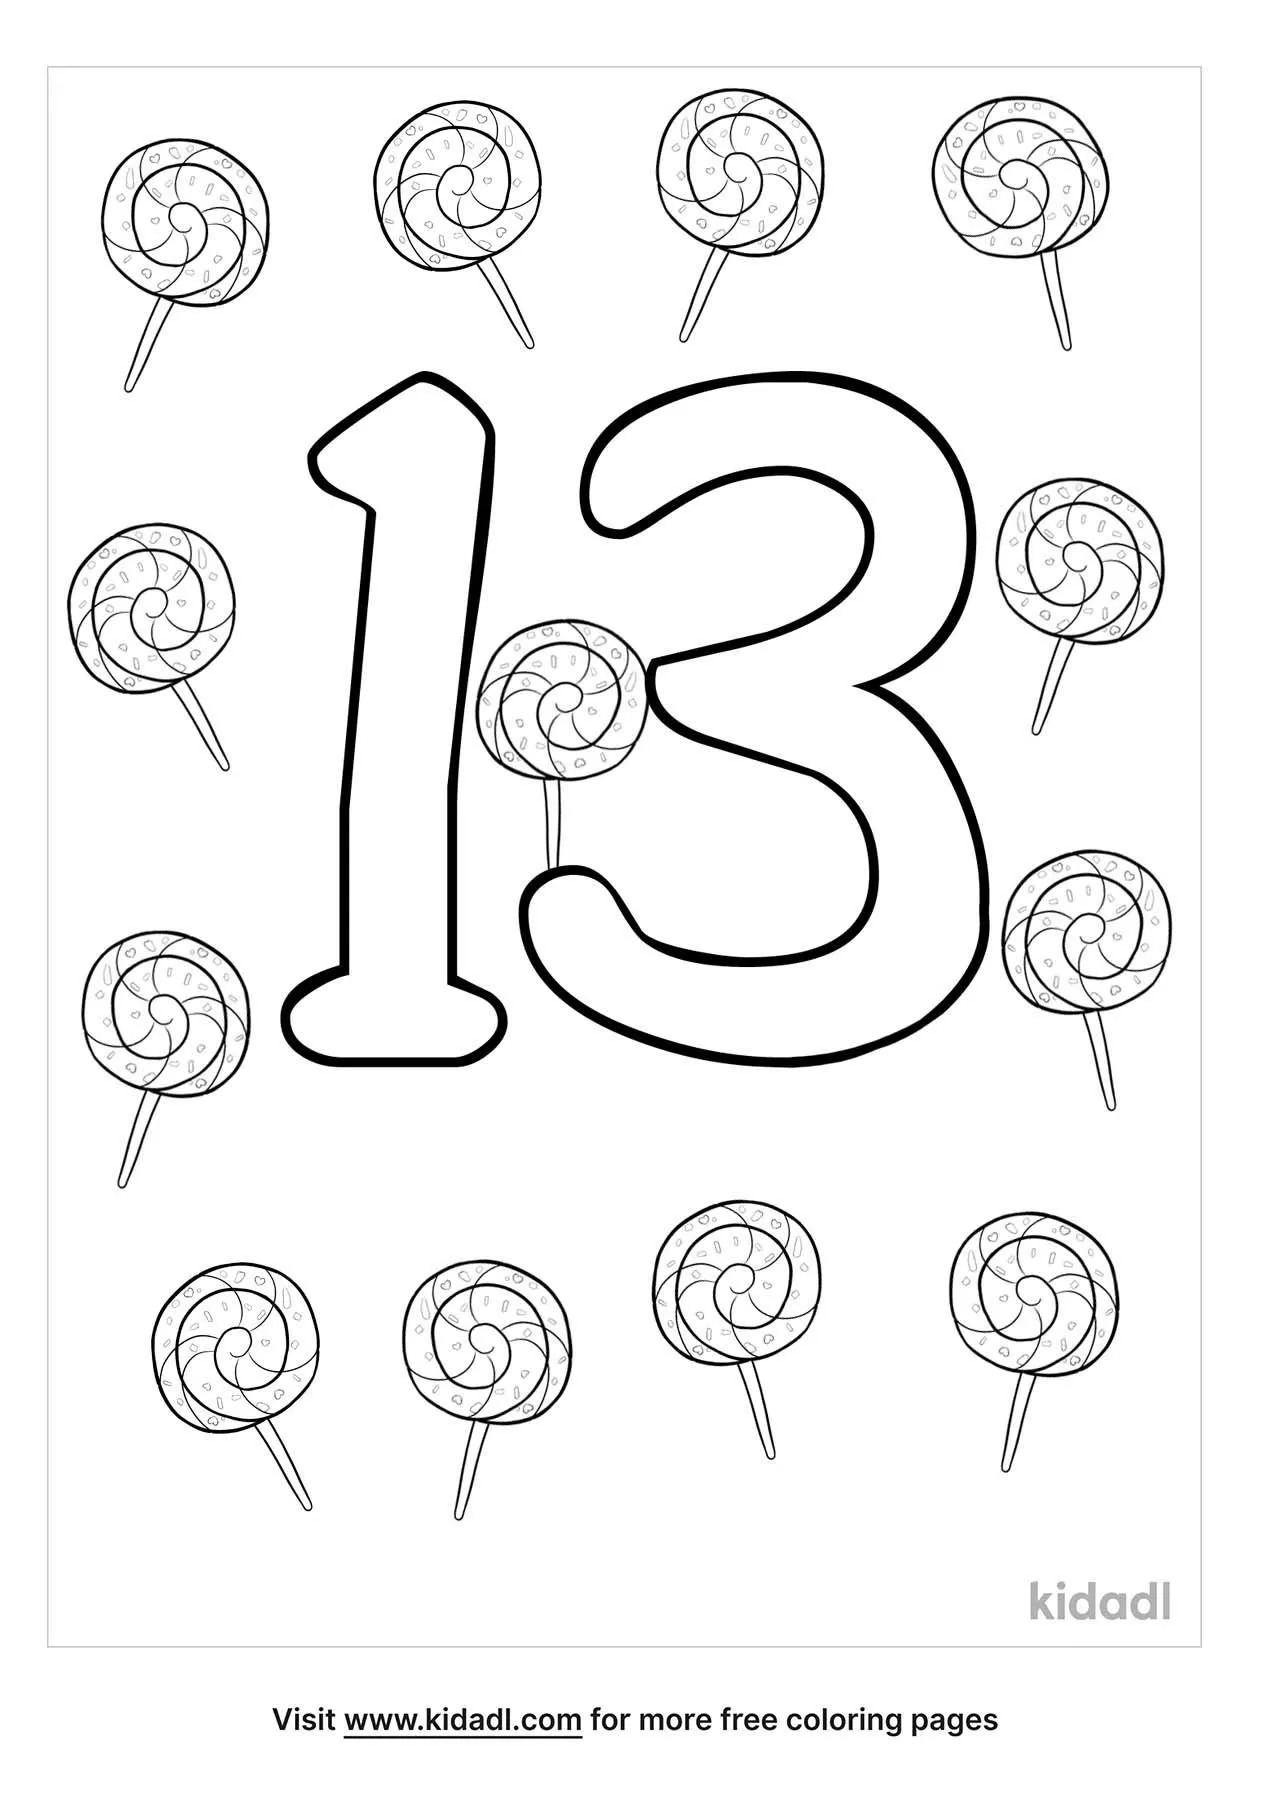 Number 13 Coloring Pages Free Numbers Coloring Pages Kidadl